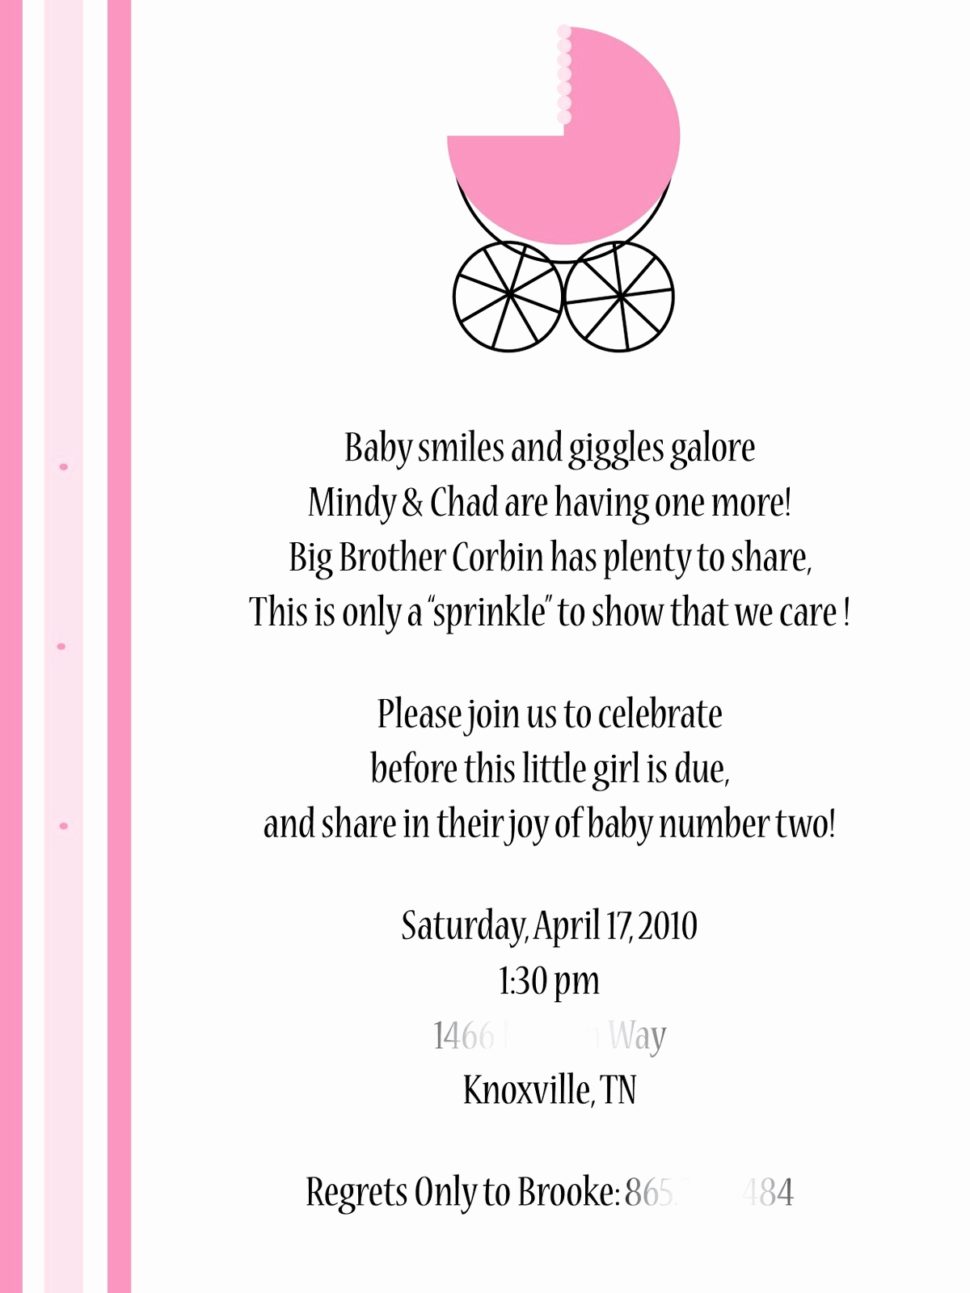 Medium Size of Baby Shower:36+ Retro Baby Shower Thank You Wording Image Concepts Baby Shower Thank You Wording As Well As Coed Baby Shower With Baby Shower Favors To Make Plus Baby Shower Para Niño Together With Ideas Para Baby Shower